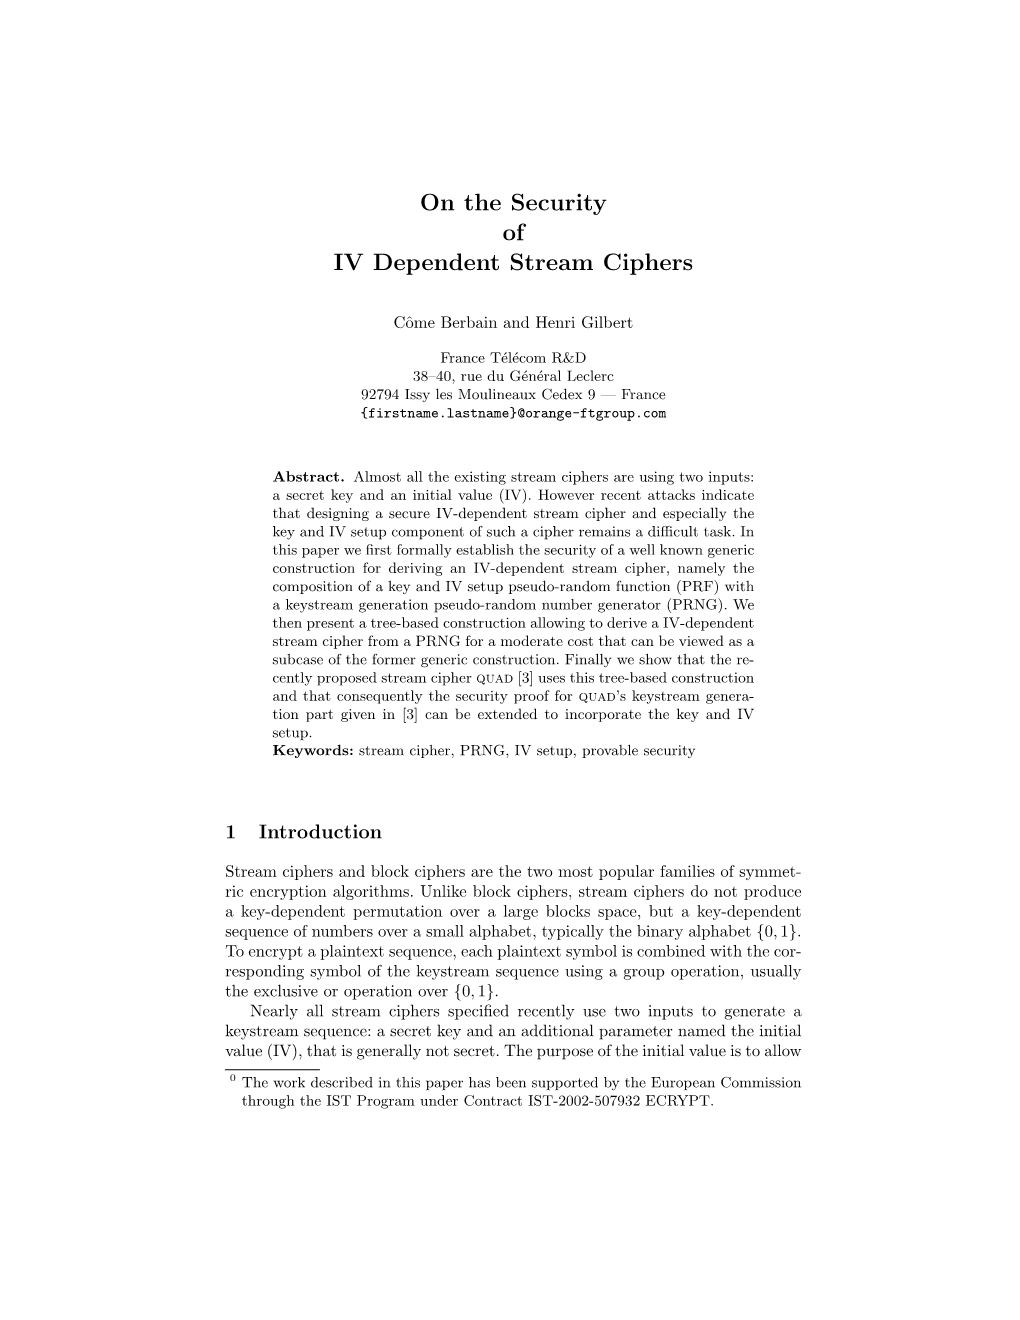 On the Security of IV Dependent Stream Ciphers